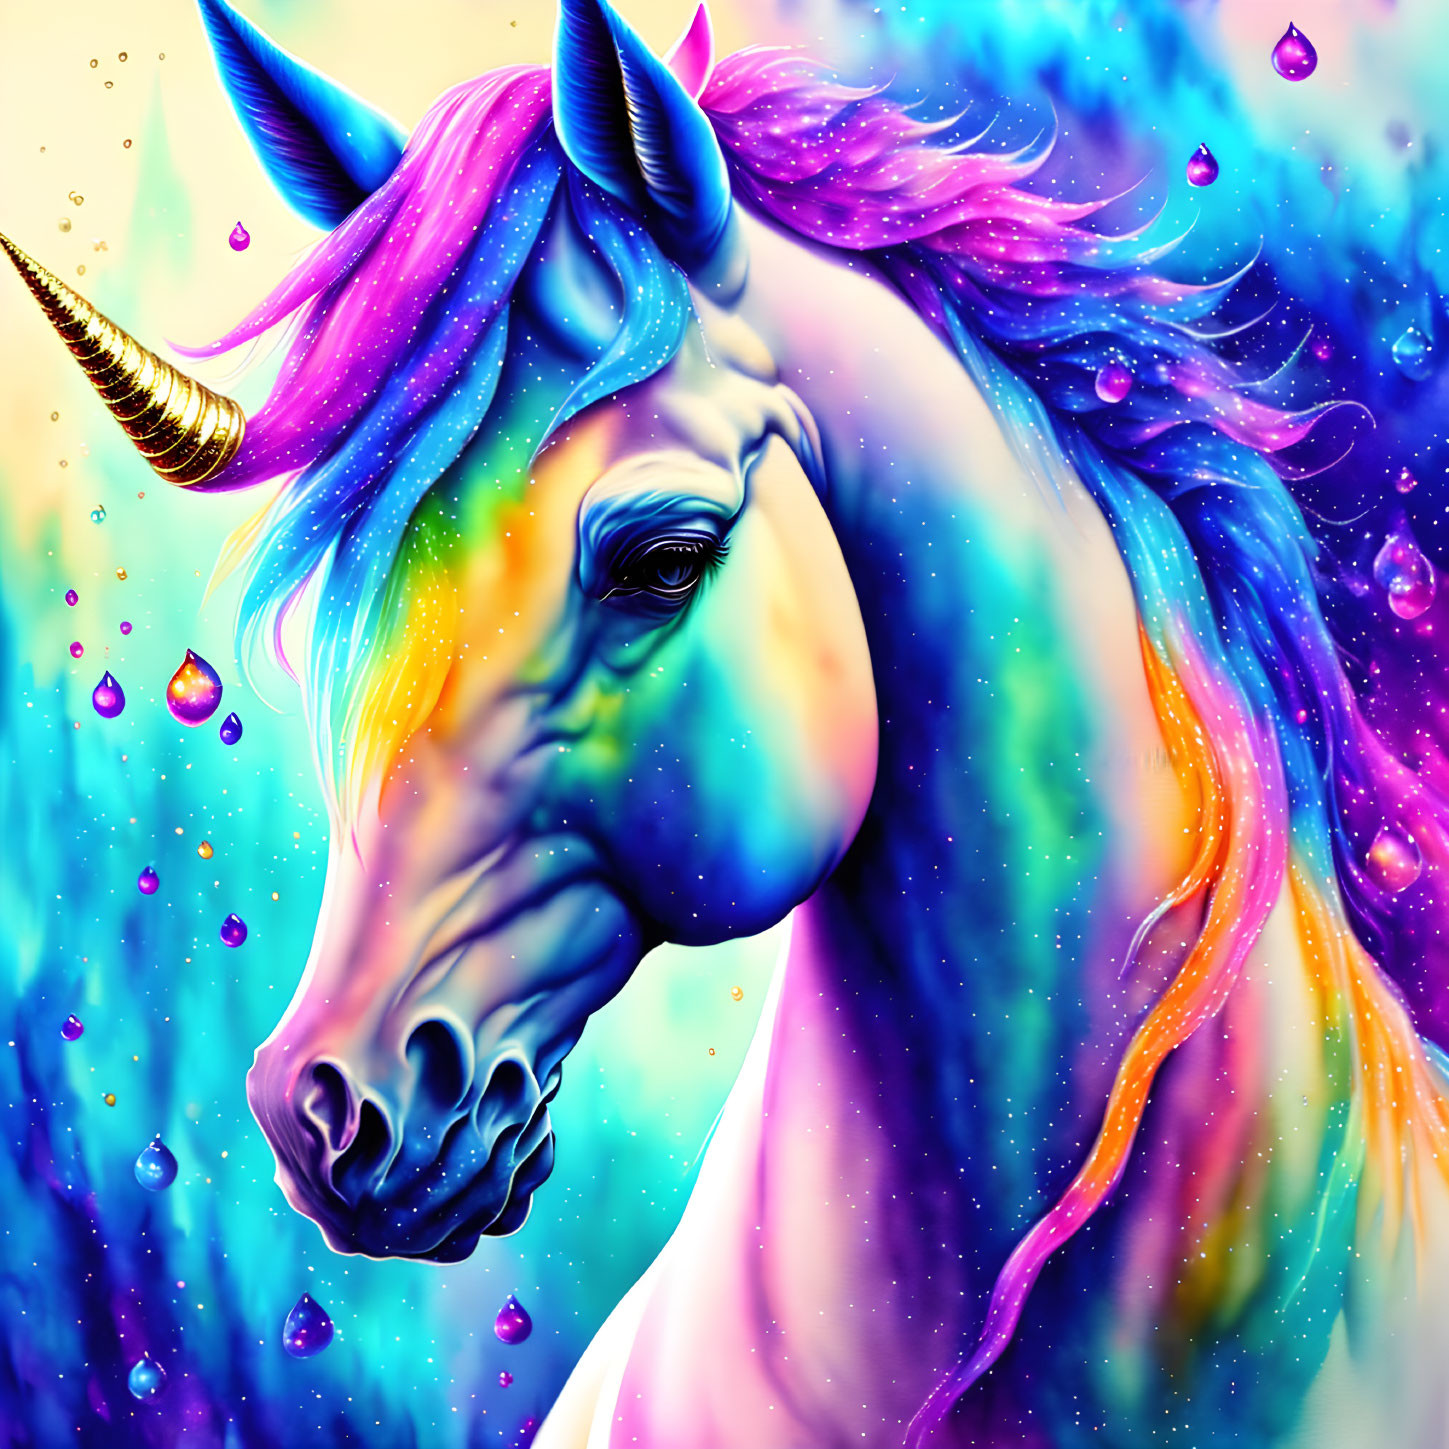 Colorful Unicorn Artwork with Rainbow Mane and Golden Horn